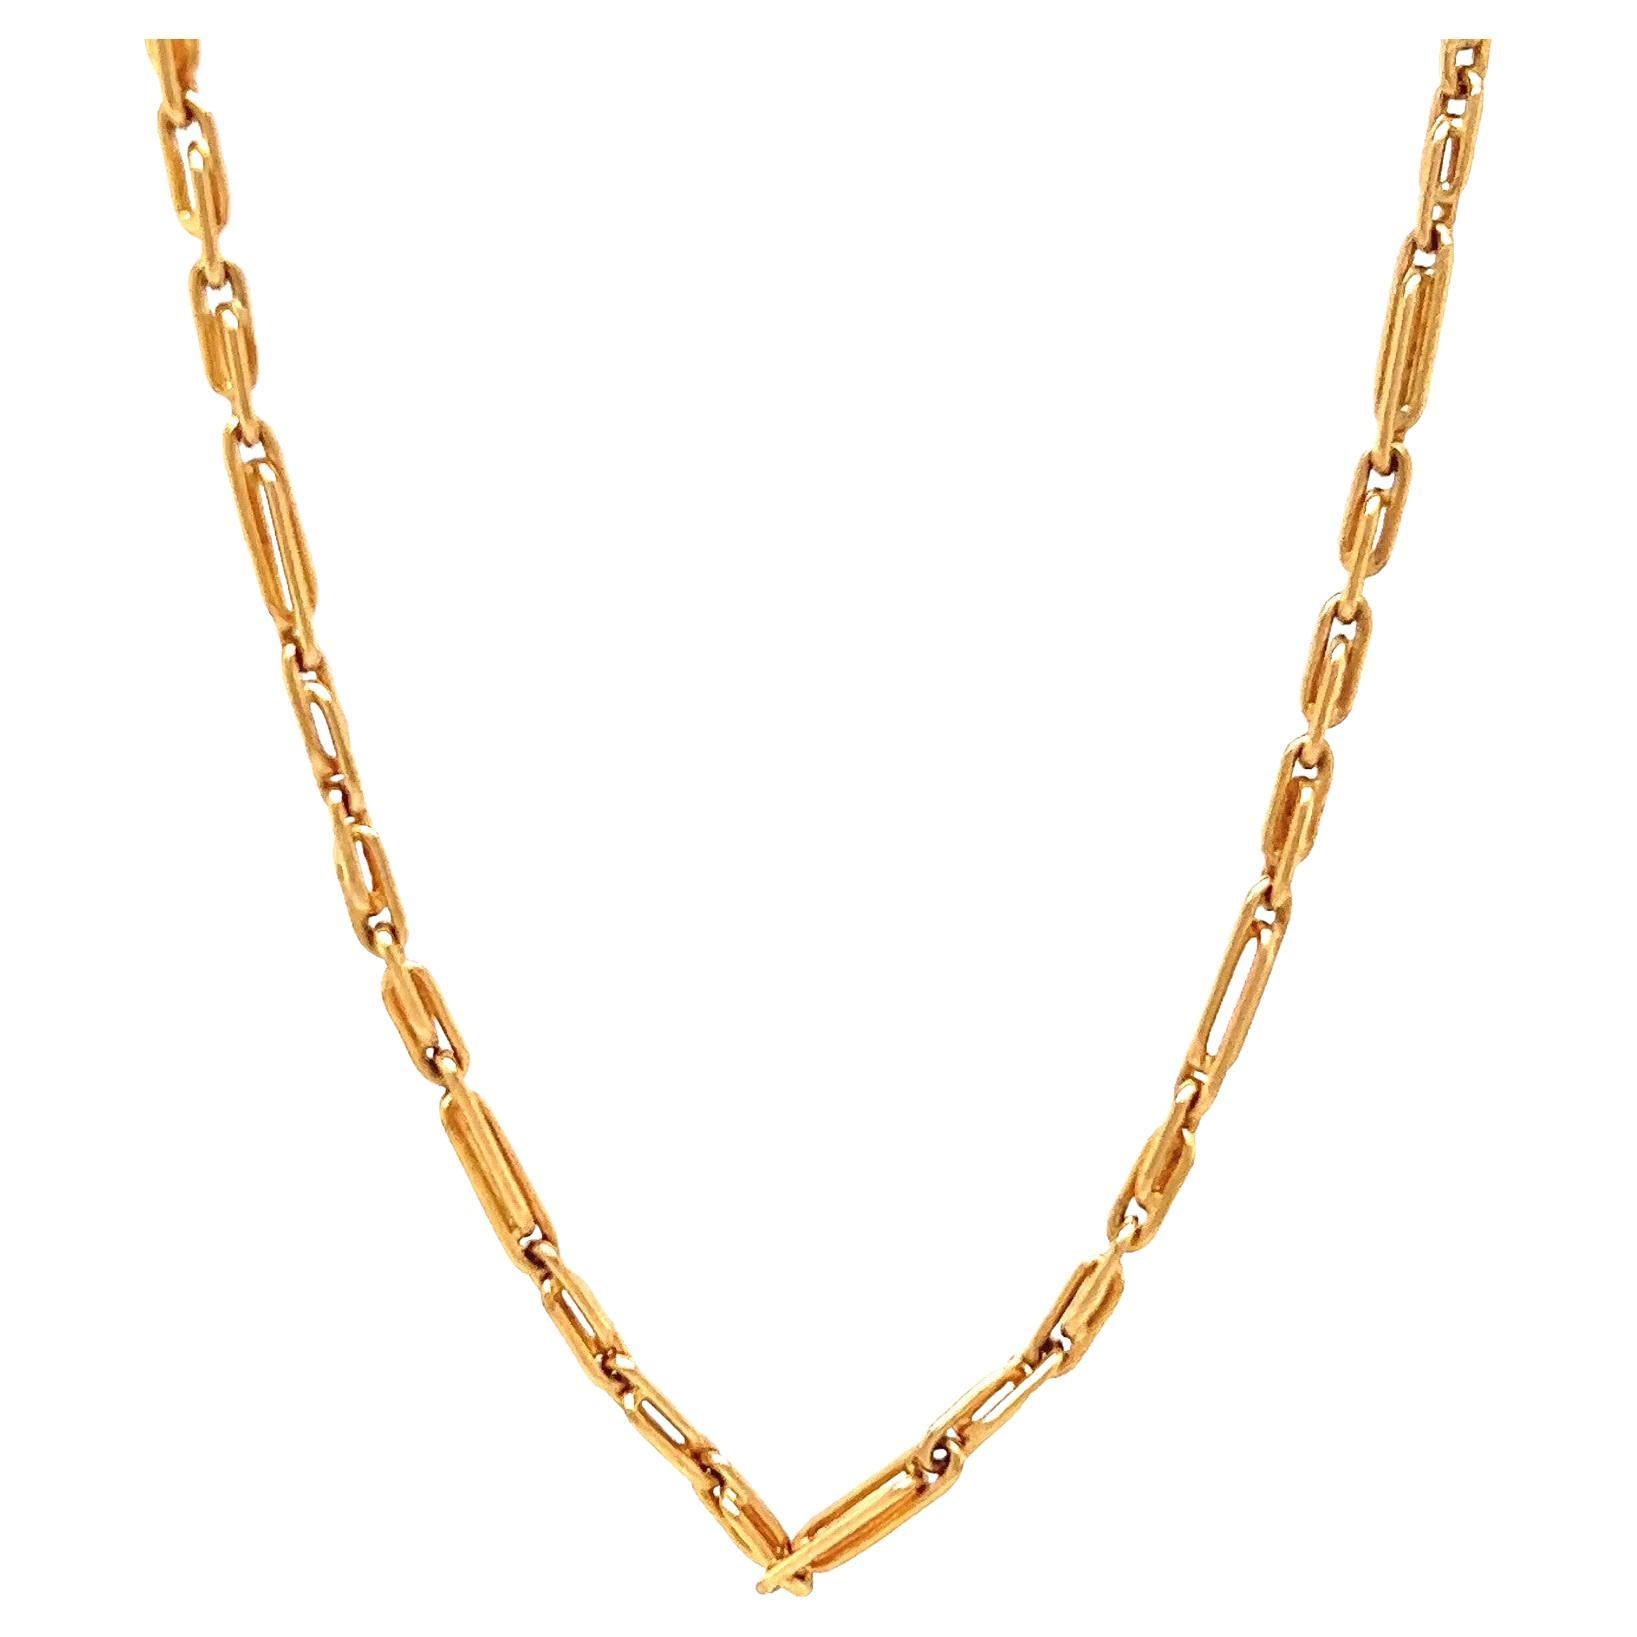 18k Gold Cleopatra Style Necklace - 2 For Sale on 1stDibs